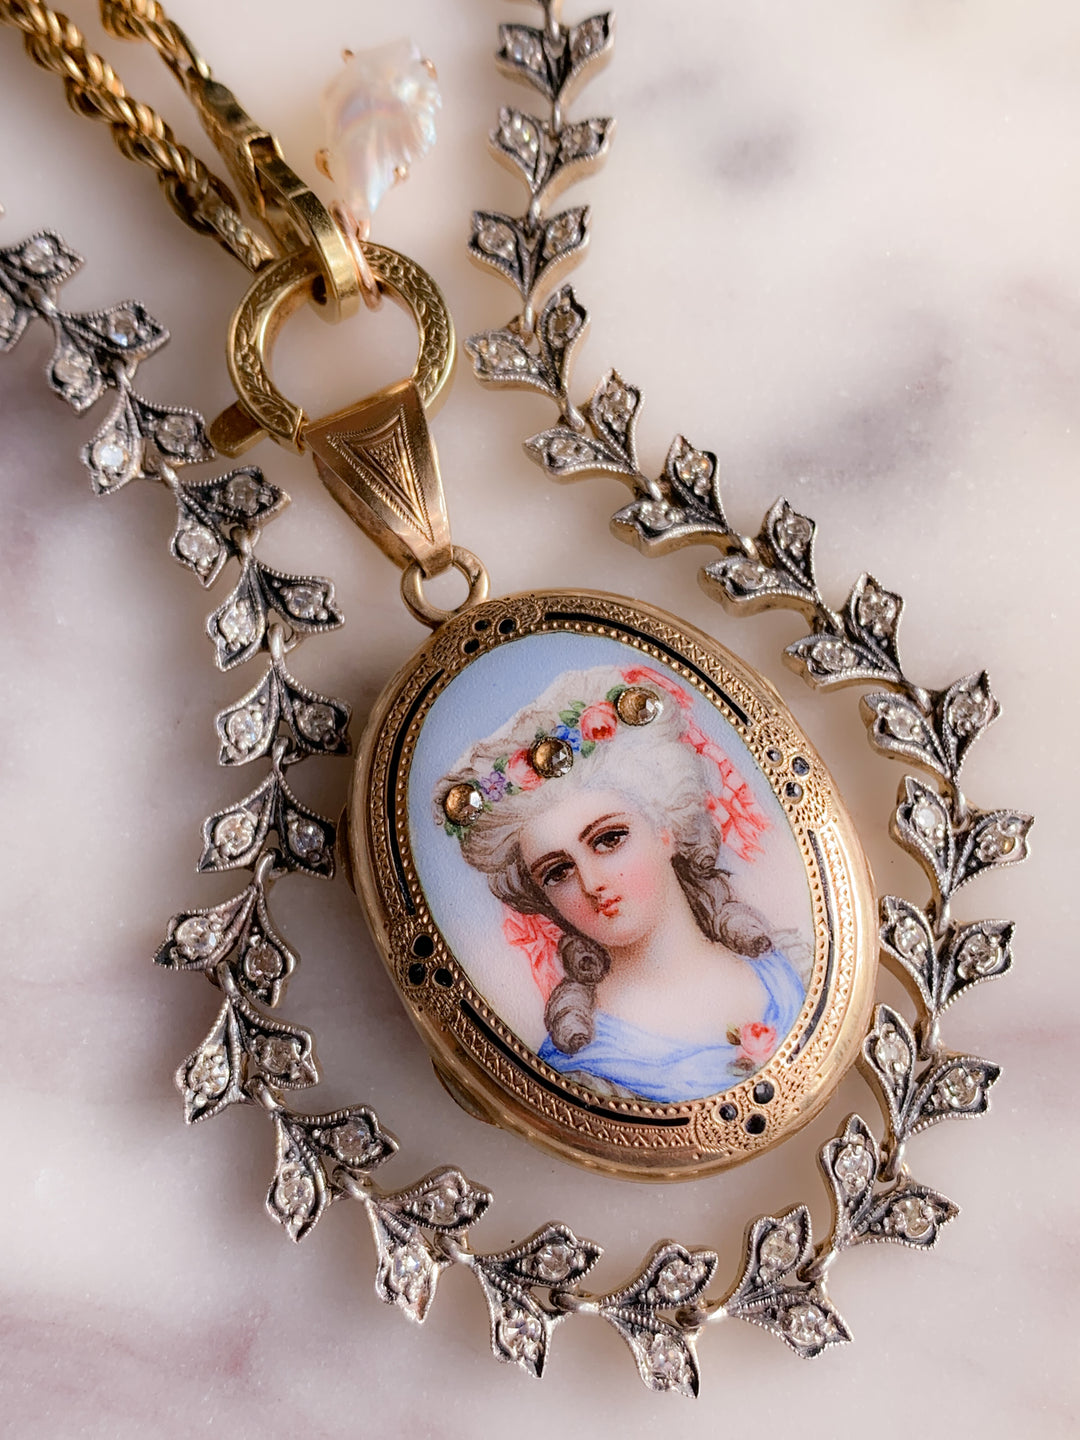 Victorian Portrait Locket of an 18th C Woman with Rose Diamonds